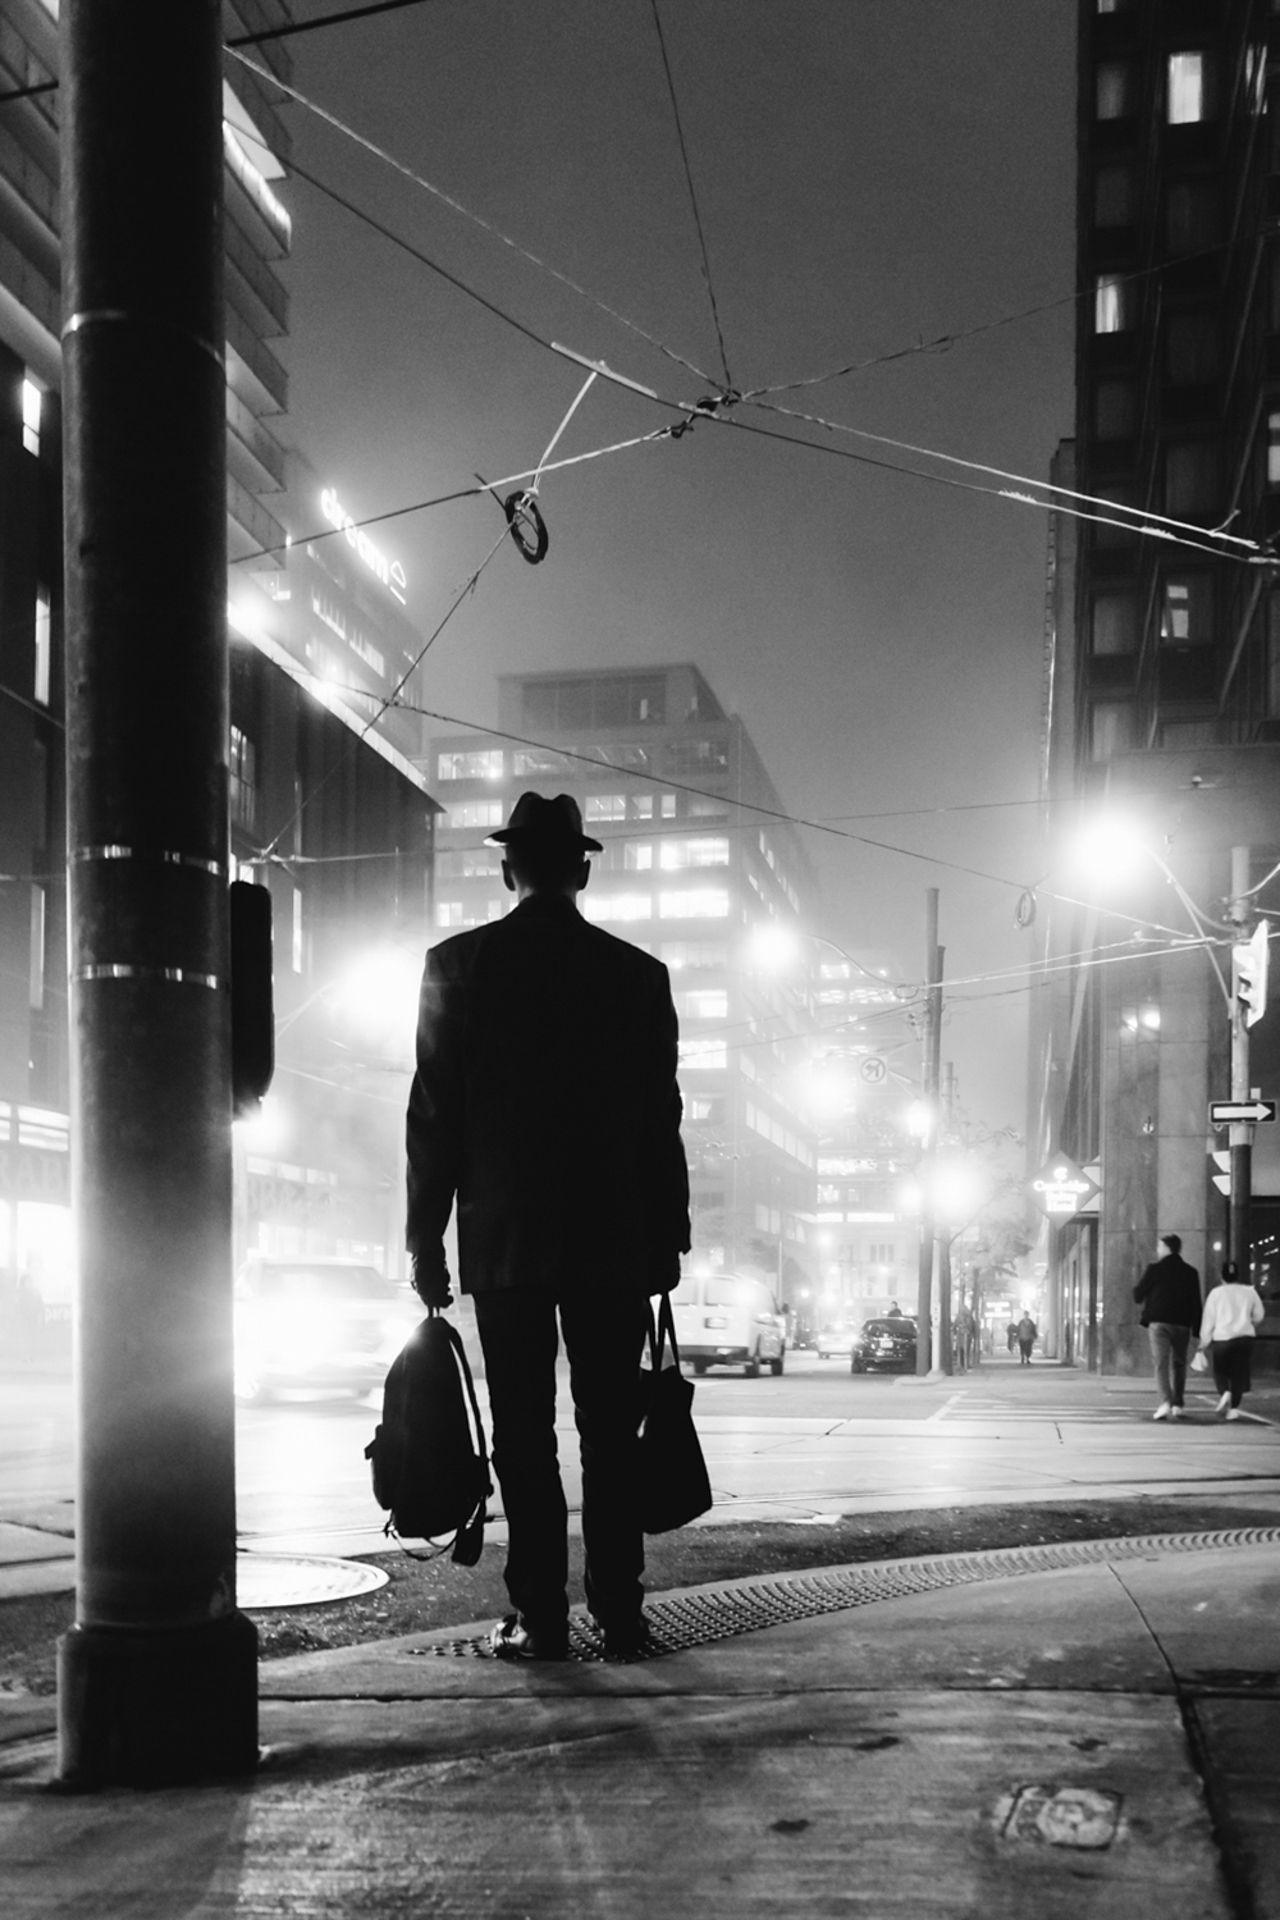 The photo depicted is in black and white and is taken of a man in a dress coat facing away from the camera holding a backpack in one hand and a tote bag in the other. He is standing at the corner of a street as bright streetlights fill the photo.